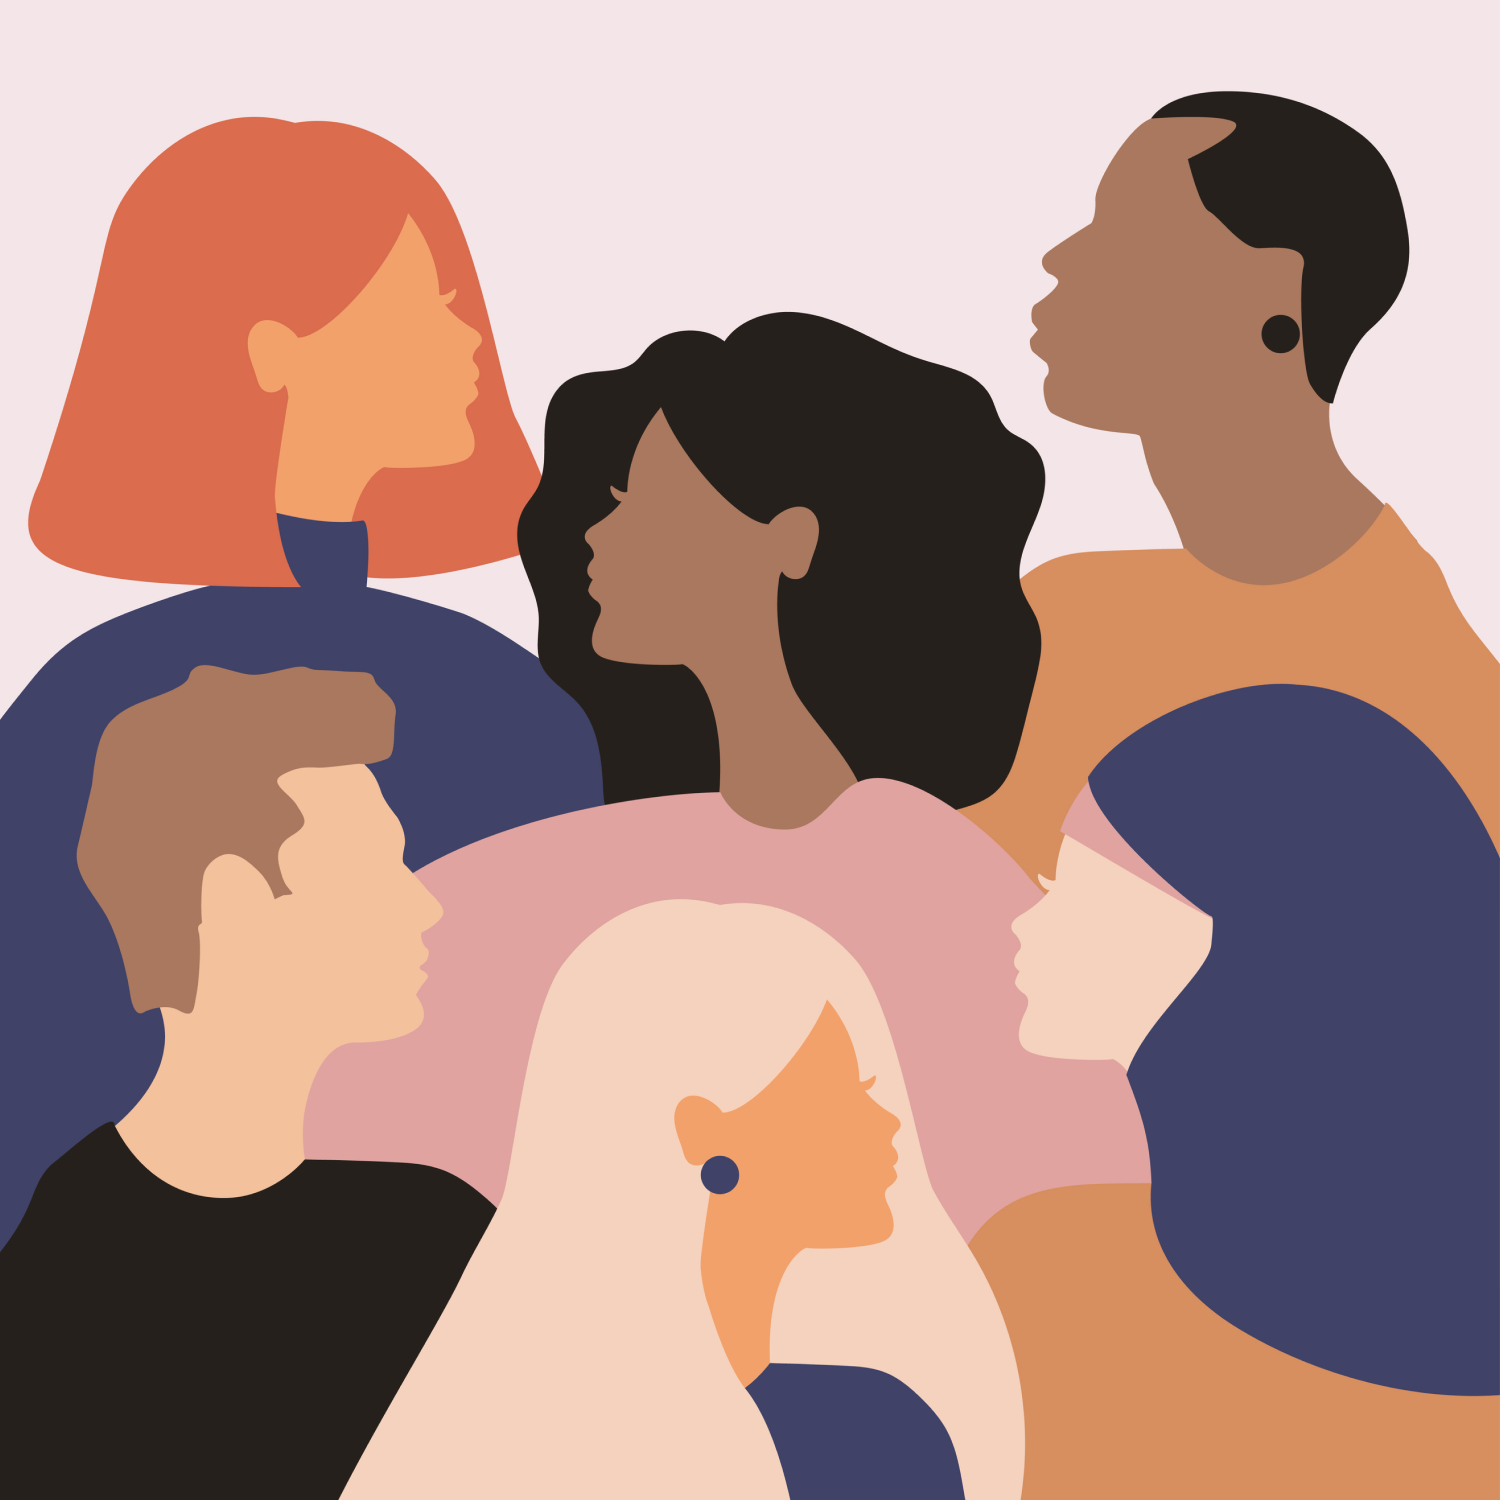 An illustration of women of different ethnicities to show unconscious bias